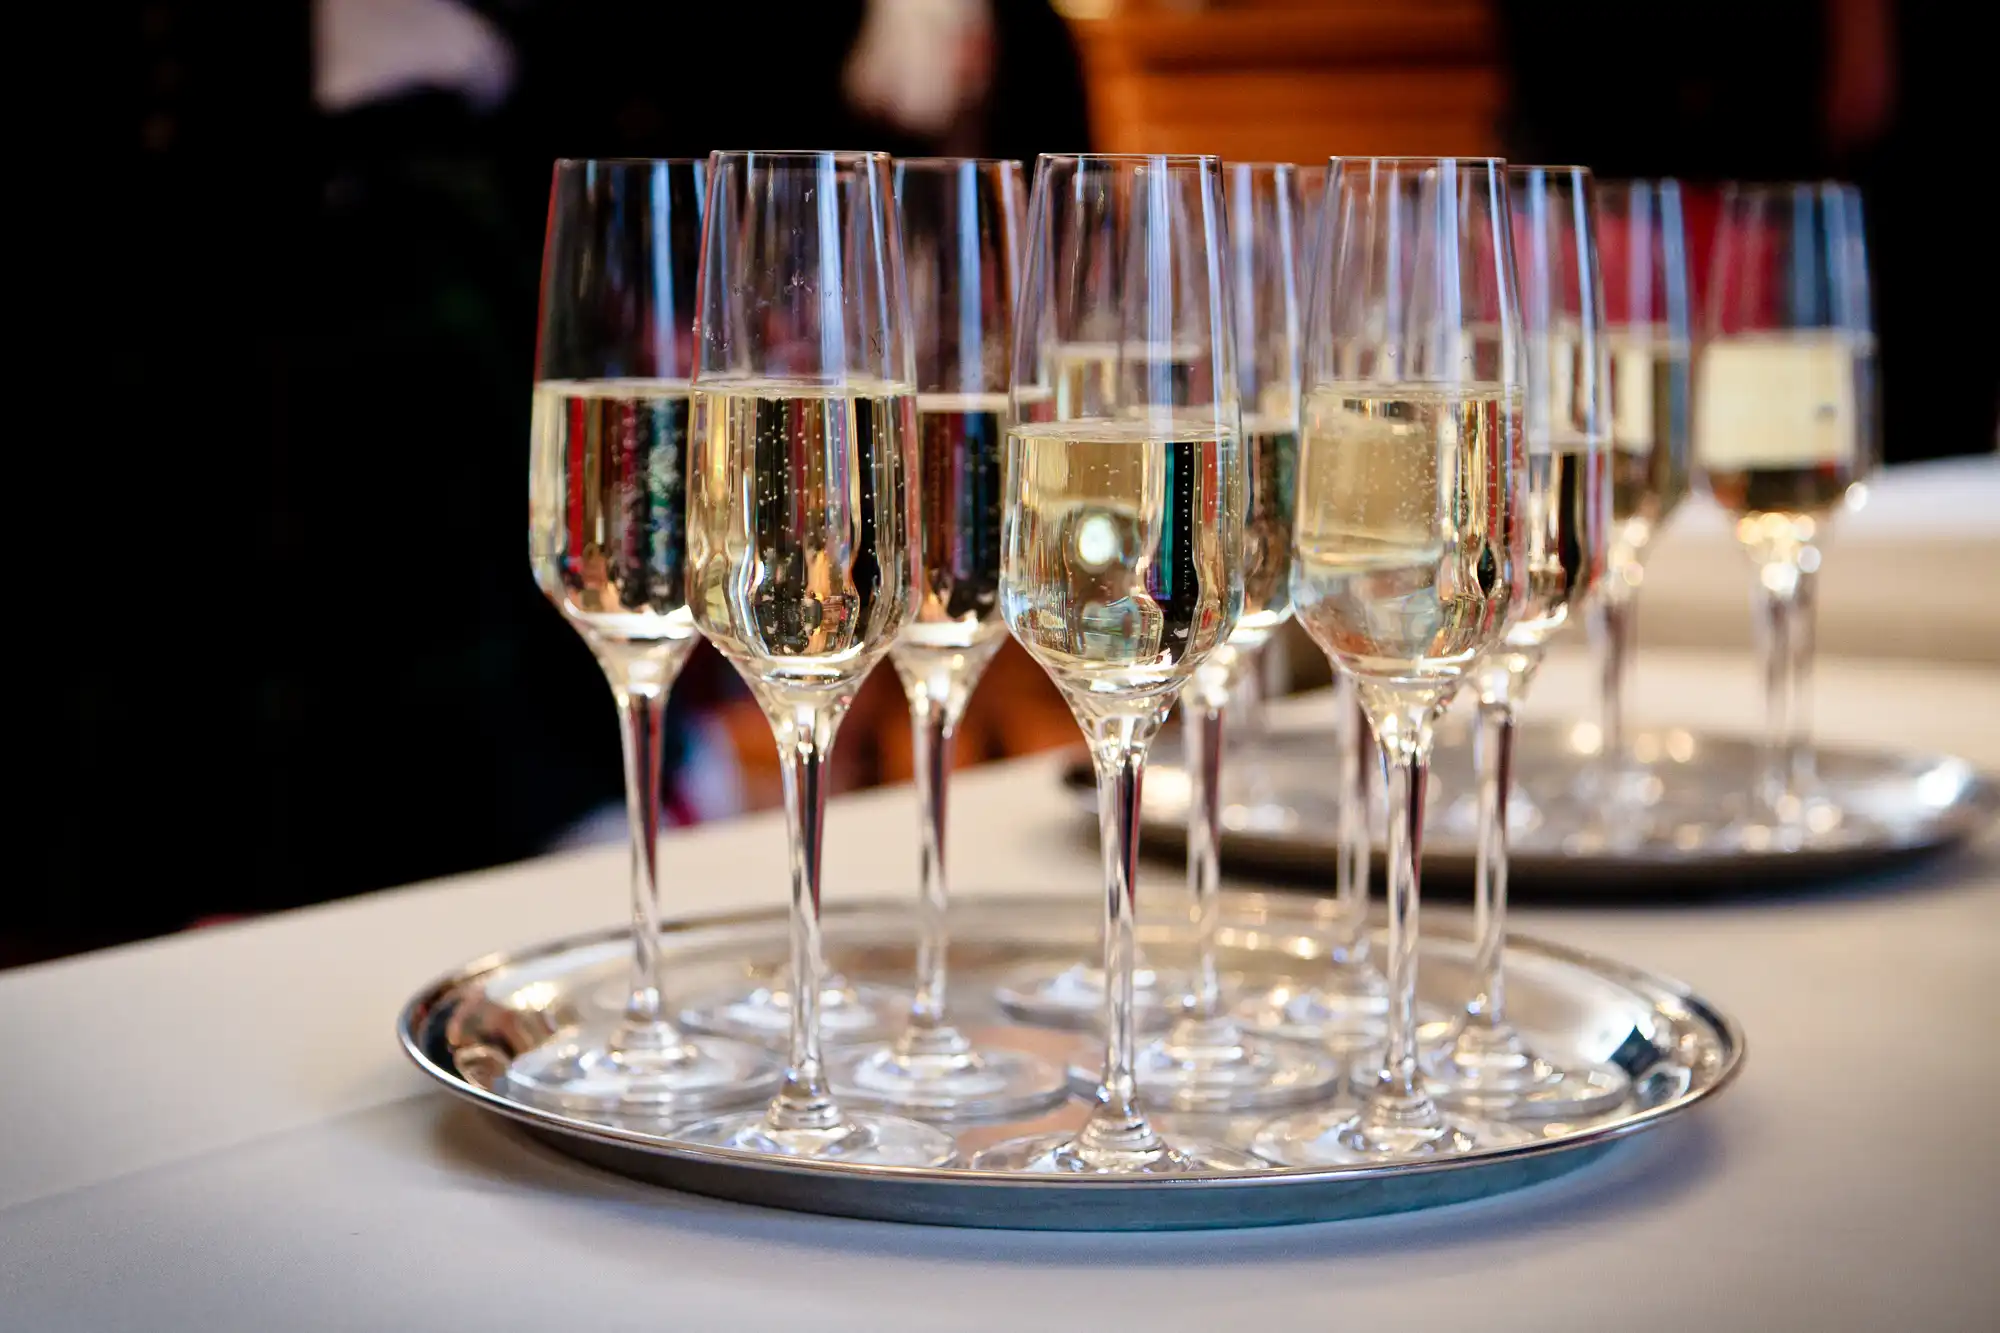 A tray of champagne glasses filled with sparkling wine, placed on a table at a formal event.